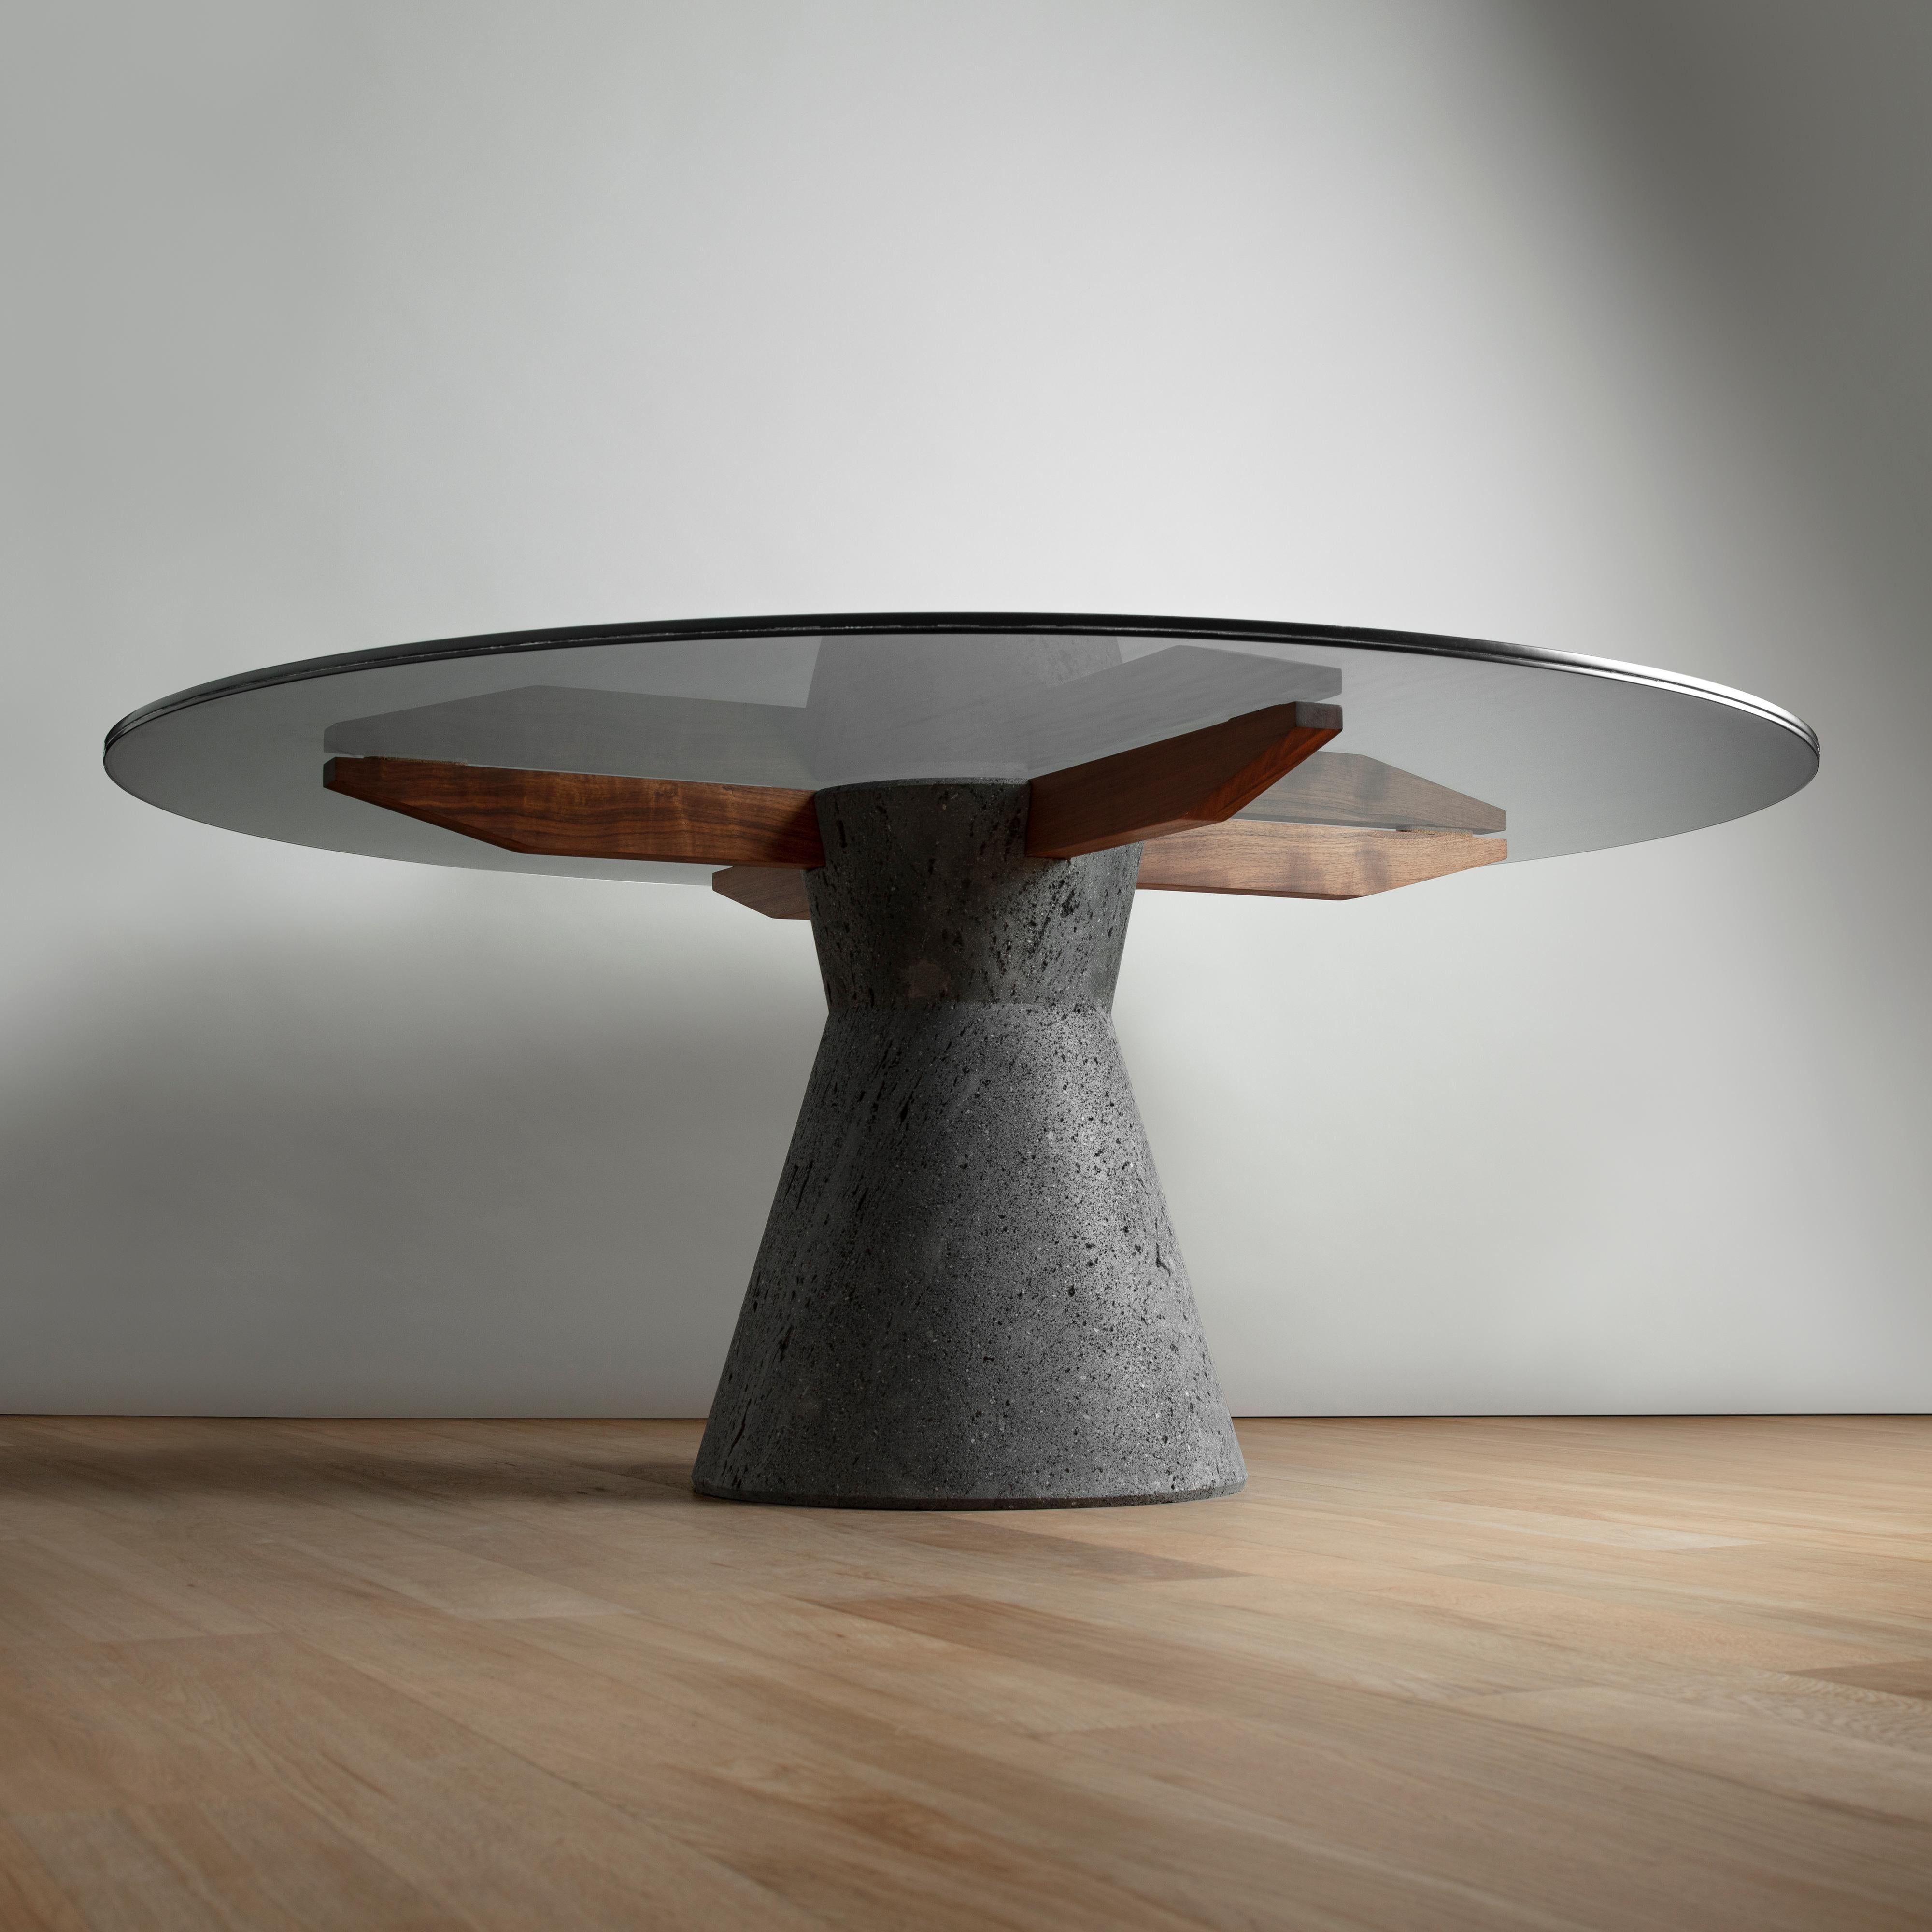 Ideal for 8 - 10 people
Introducing our outstanding dining table, where the combination of materials creates a stunning masterpiece. This exceptional piece features a volcanic stone monolith as its base, serving as a captivating point of